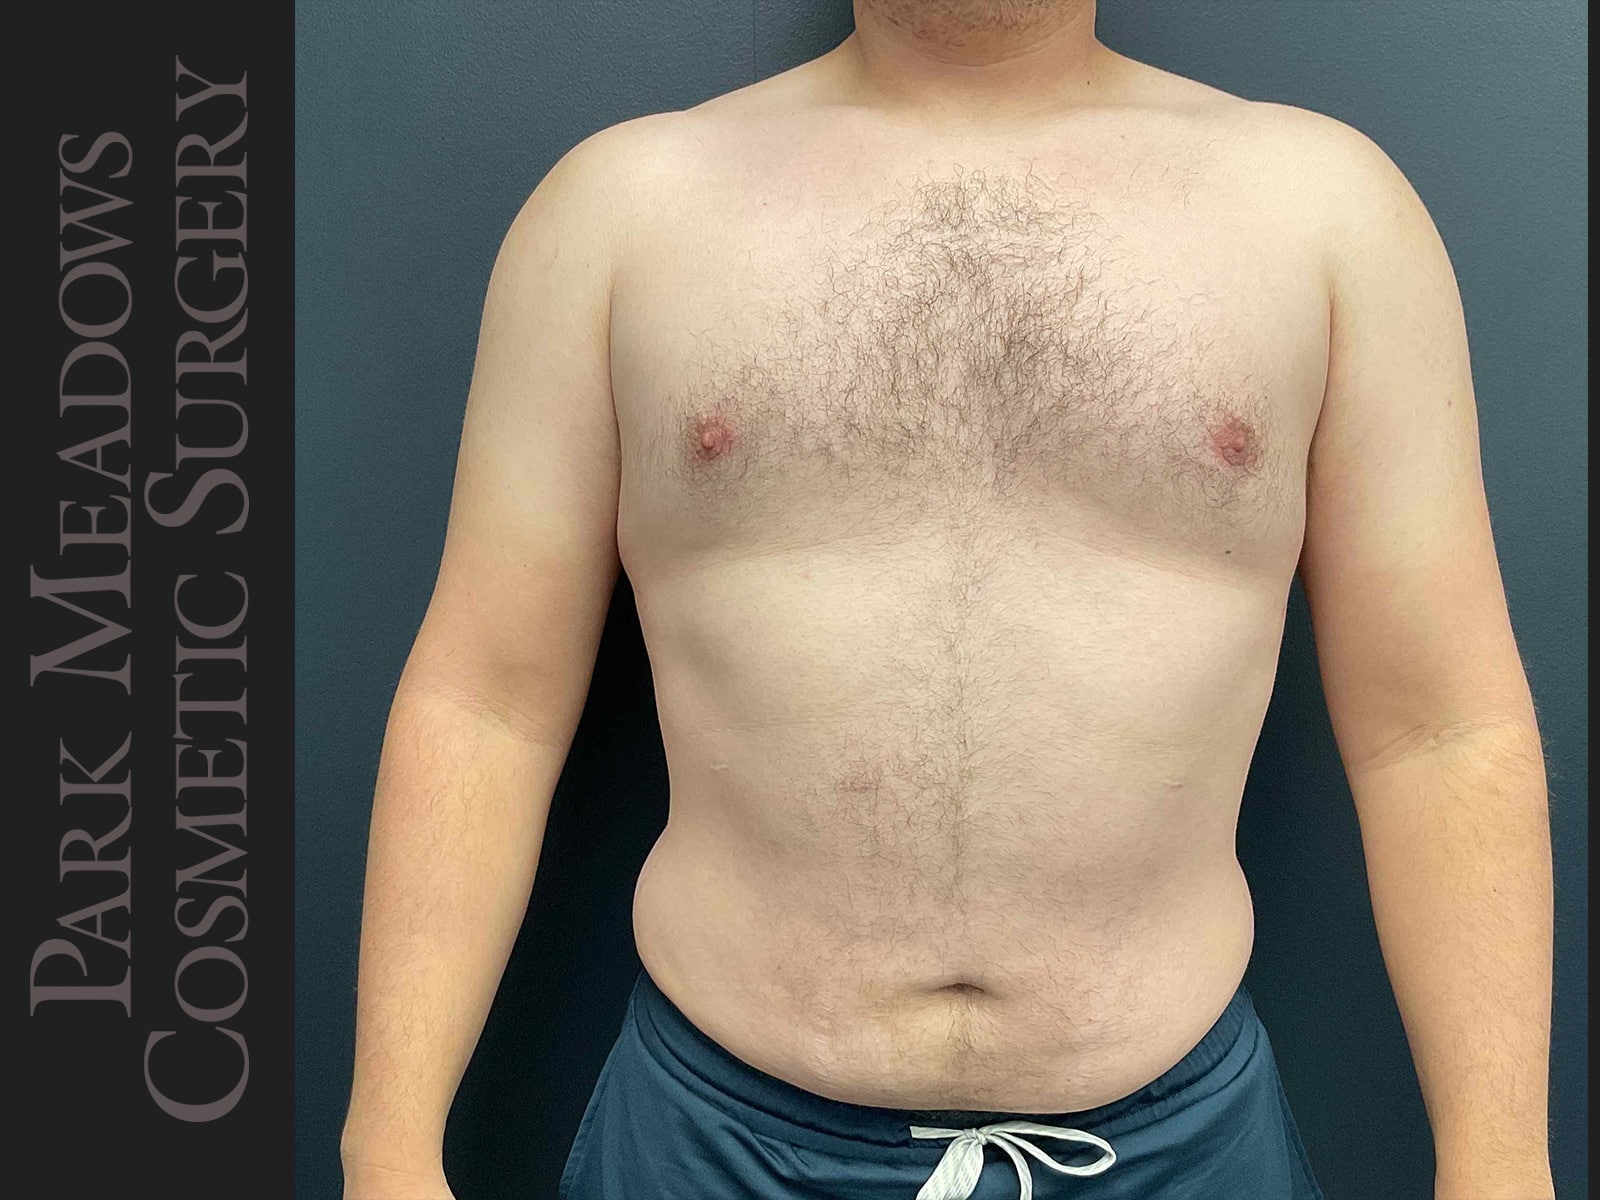 Gynecomastia (direct excision and liposuction); liposuction of abdomen and flanks